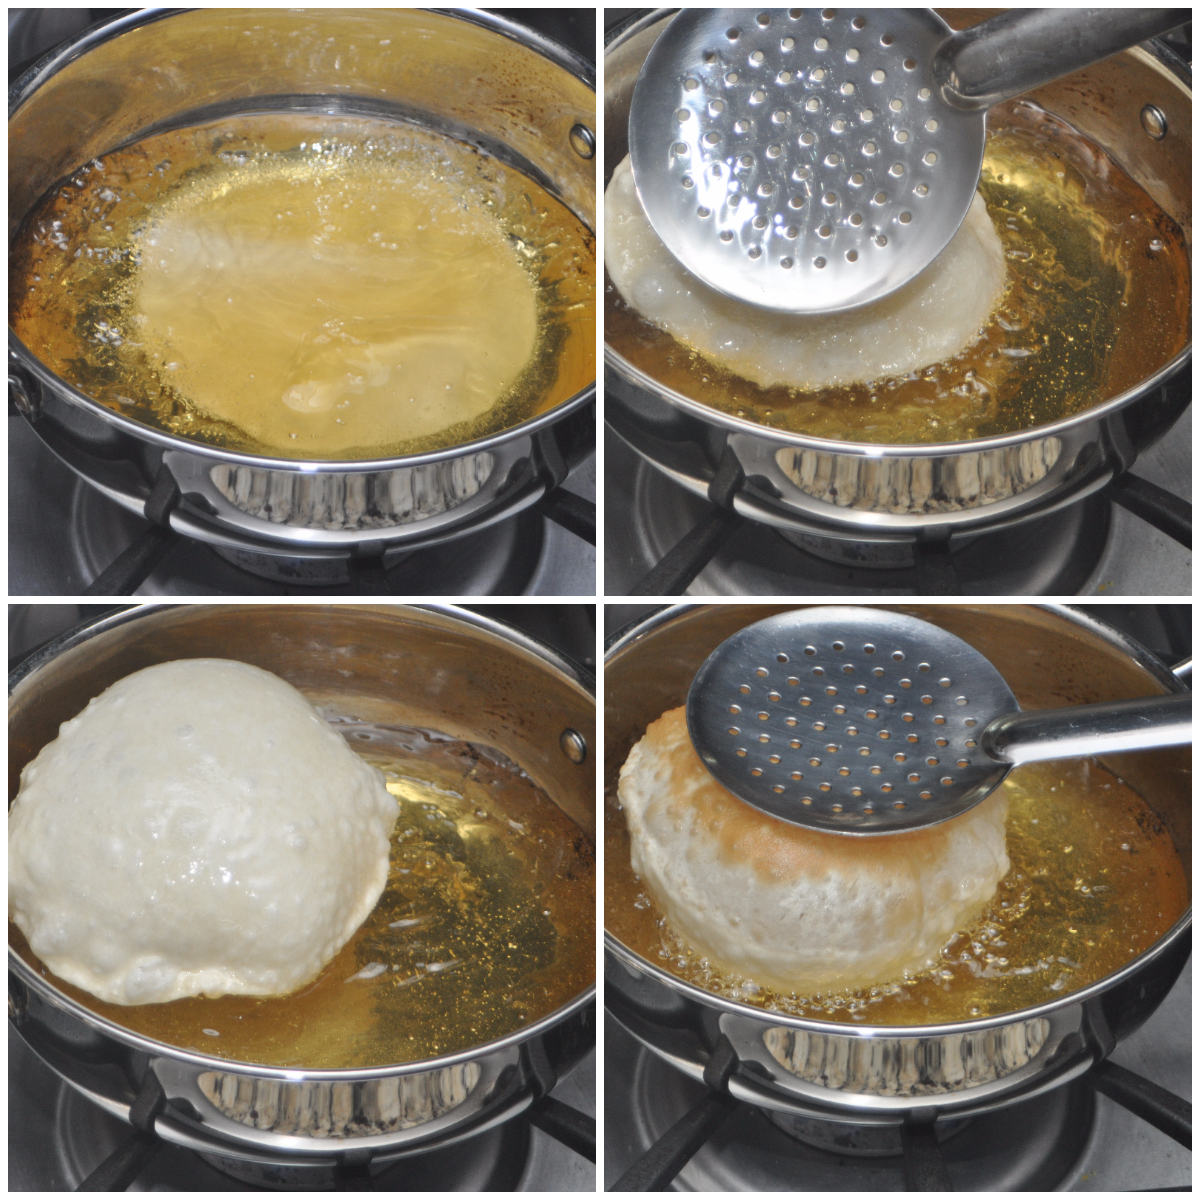 Frying bhatura in oil.